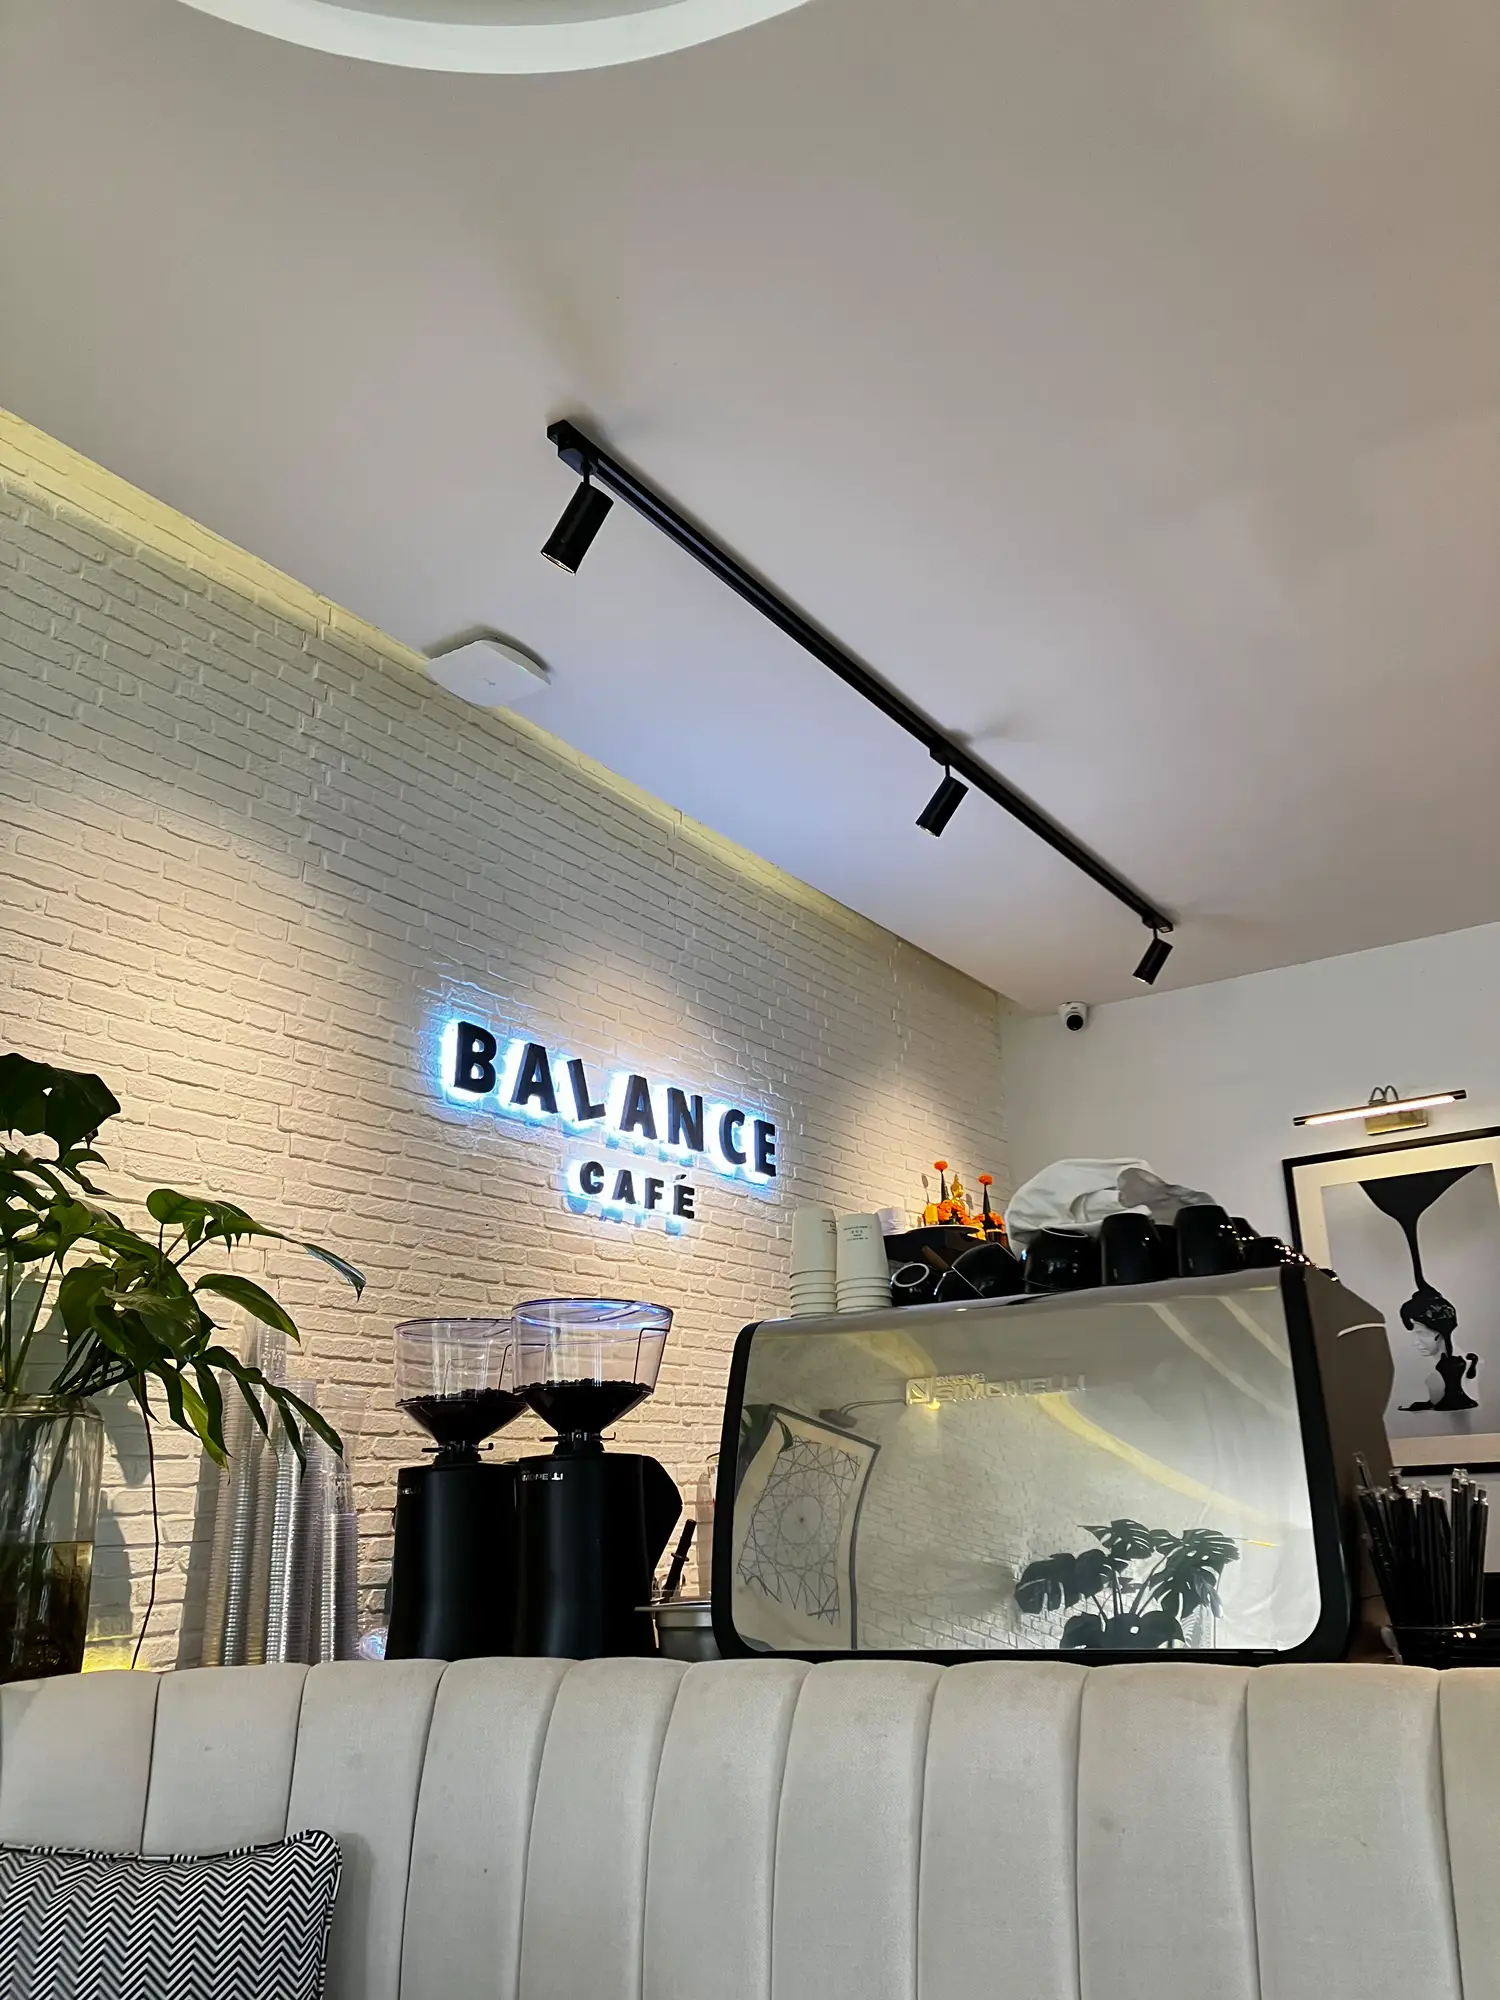 BALANCE CAFE @Pakse Laos, Gallery posted by Nut_Aree New